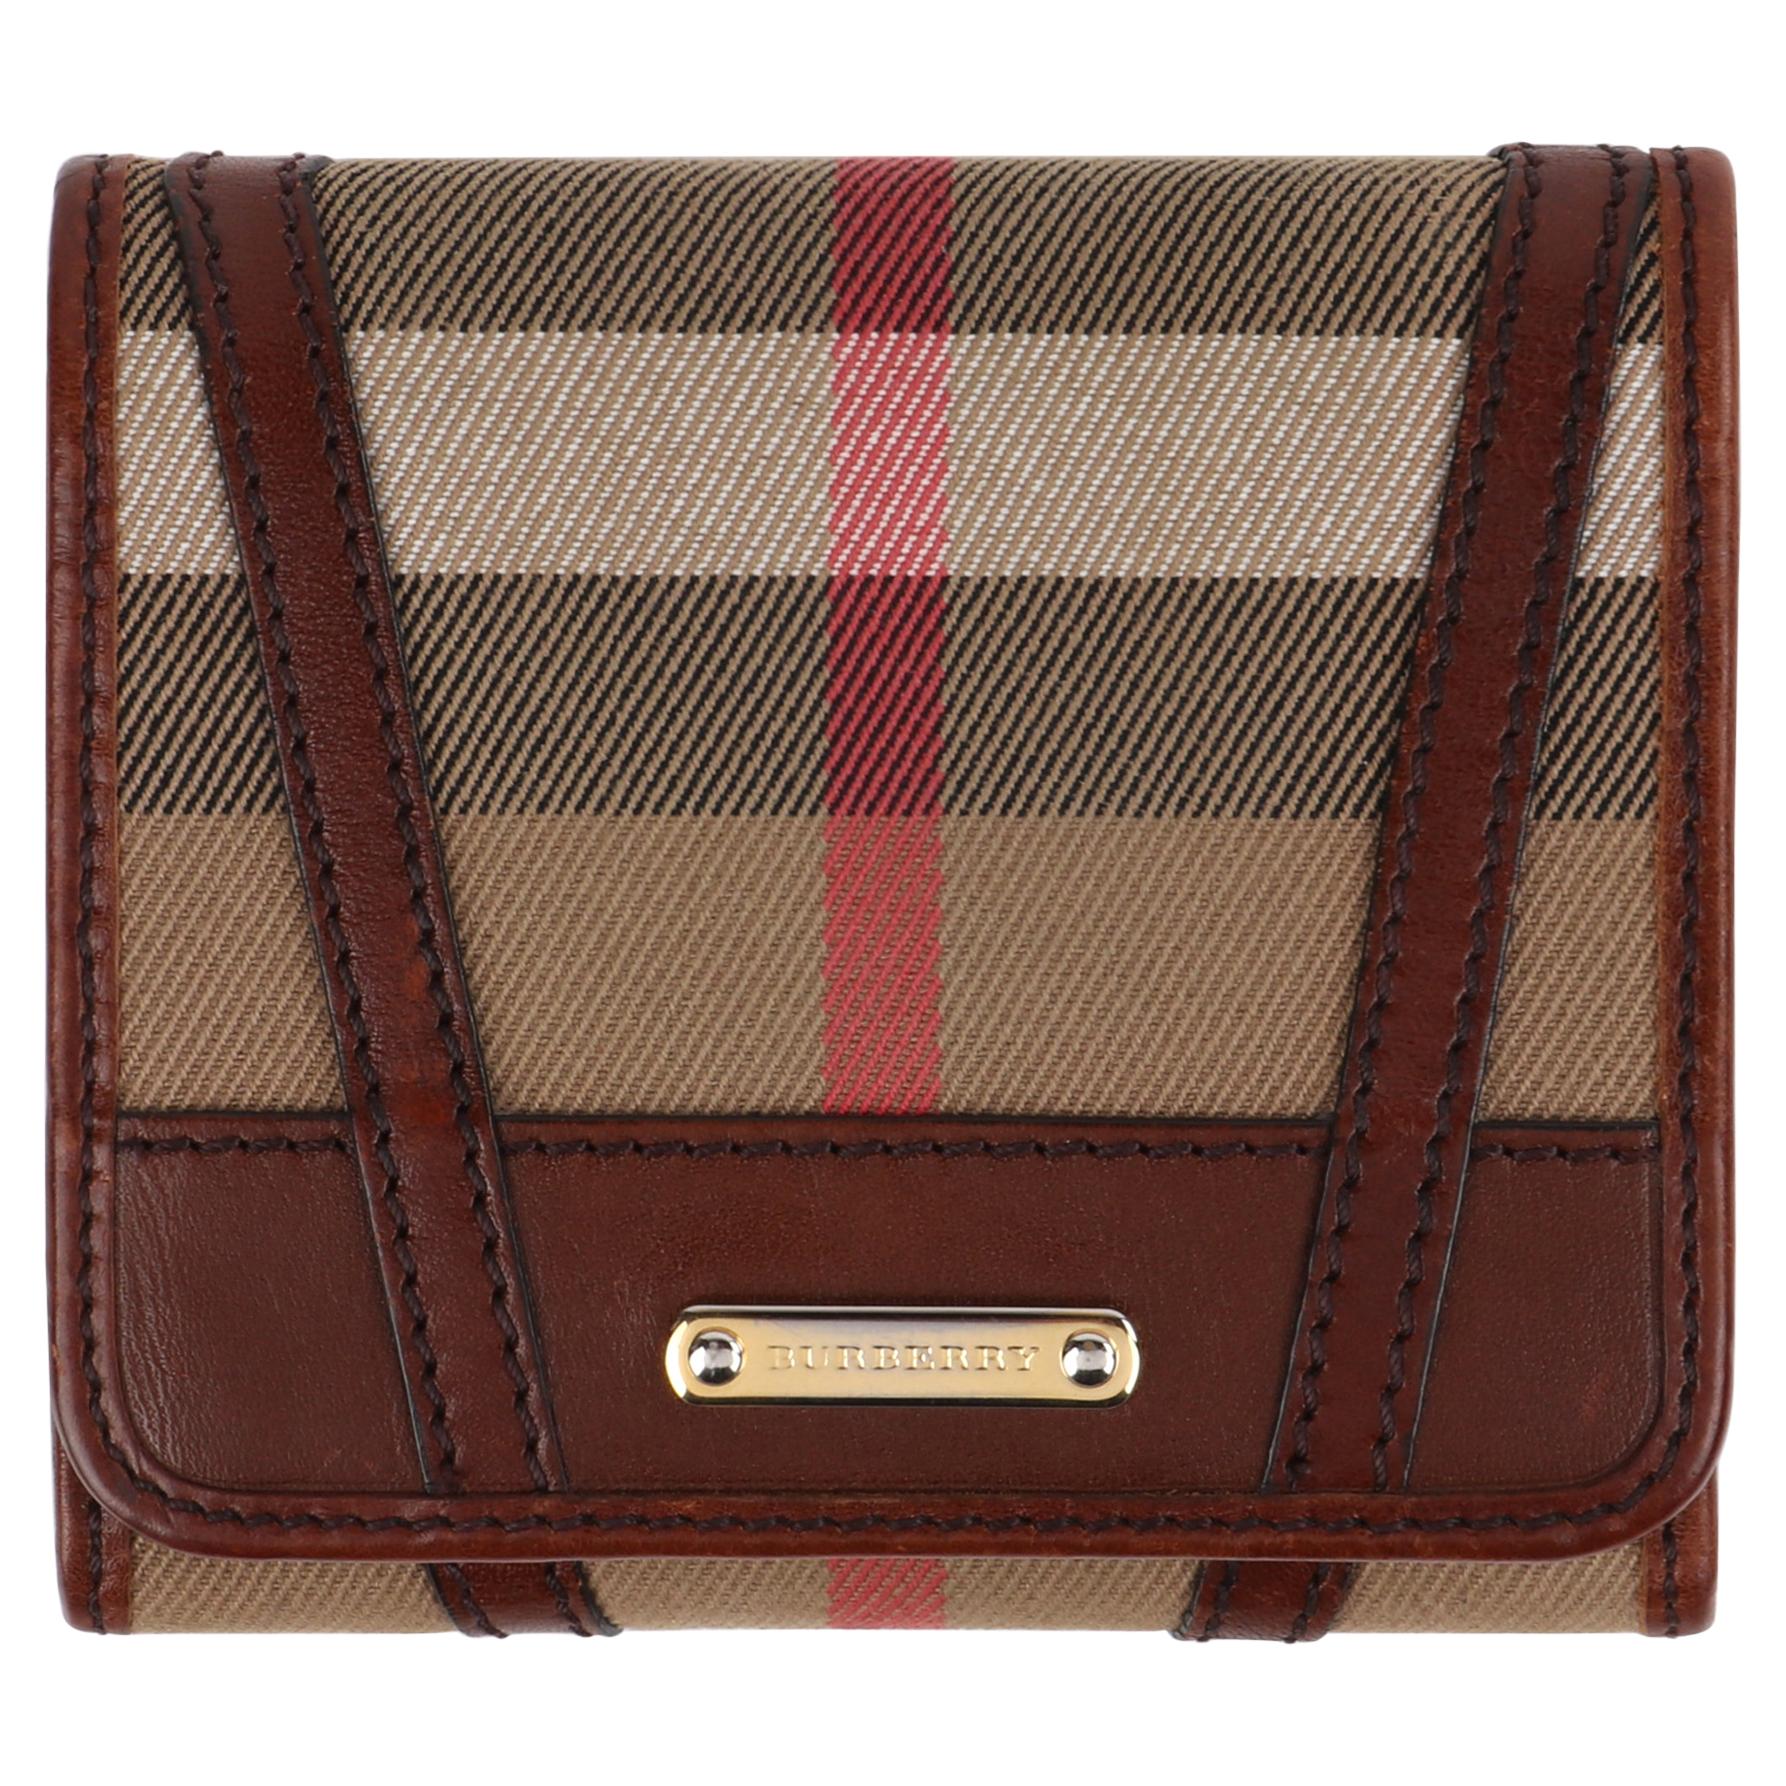 BURBERRY Nova Check Tartan Leather Trifold Square Compact Wallet